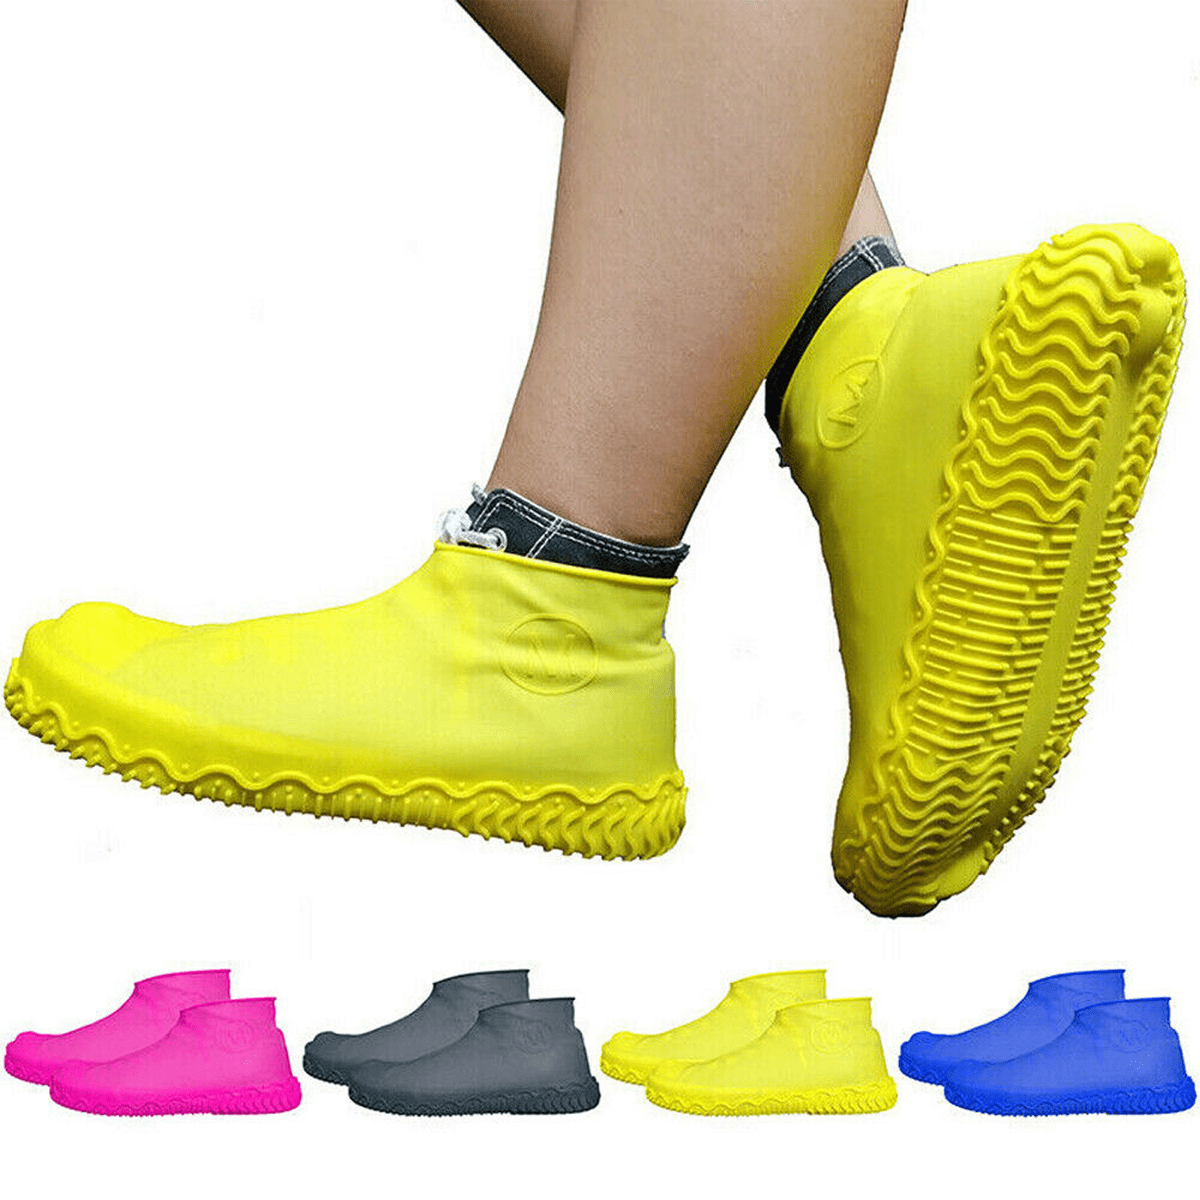 1 Pair Silicone Overshoes Rain Waterproof Shoe Cover Boot Cover Protect Reusable 